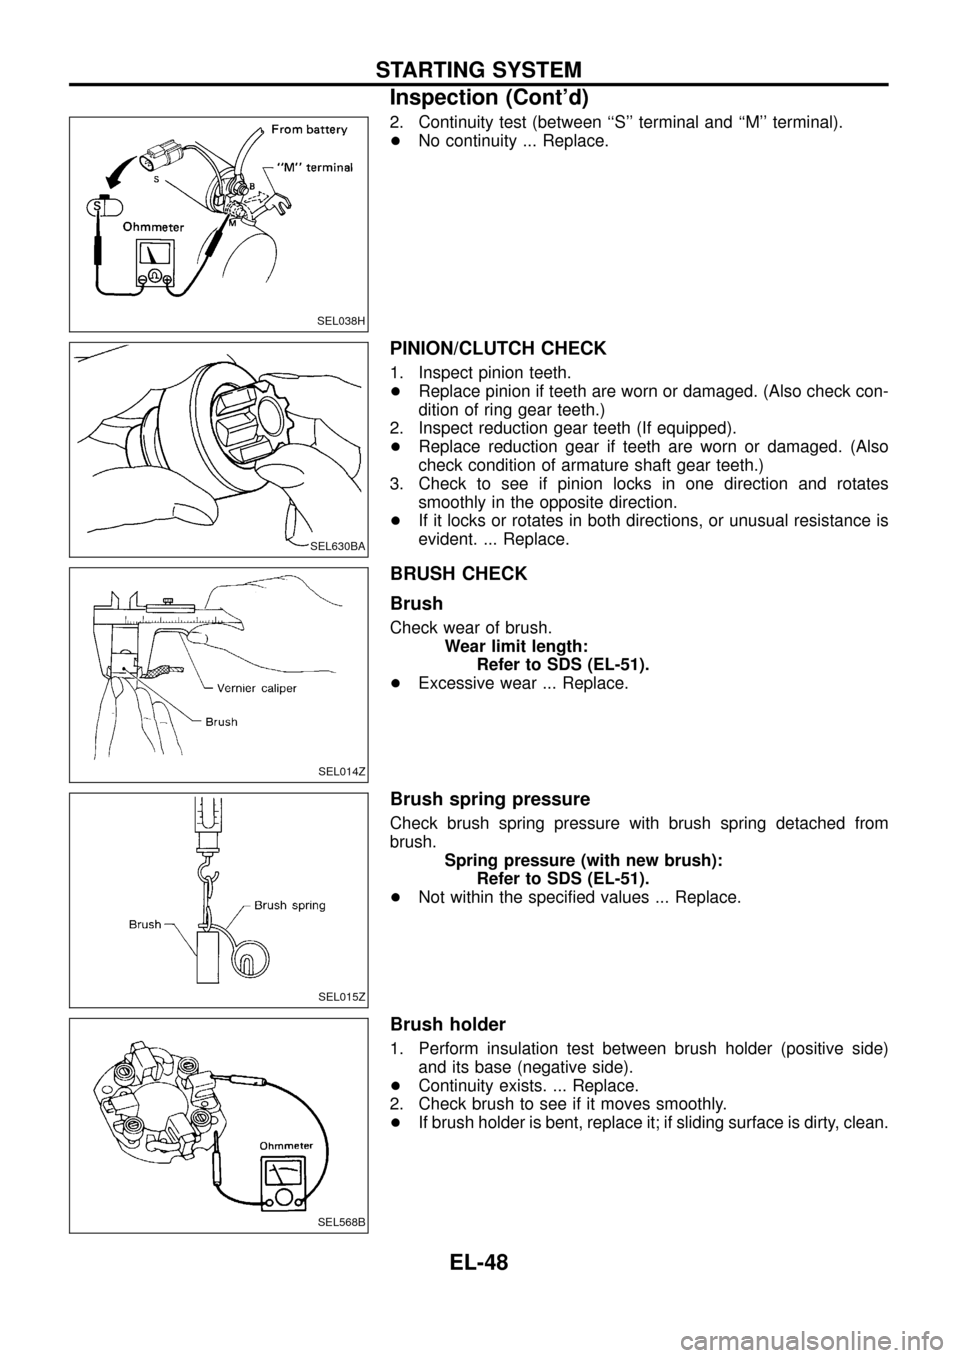 NISSAN PATROL 1998 Y61 / 5.G Electrical System Workshop Manual 2. Continuity test (between ``S terminal and ``M terminal).
+No continuity ... Replace.
PINION/CLUTCH CHECK
1. Inspect pinion teeth.
+Replace pinion if teeth are worn or damaged. (Also check con-
